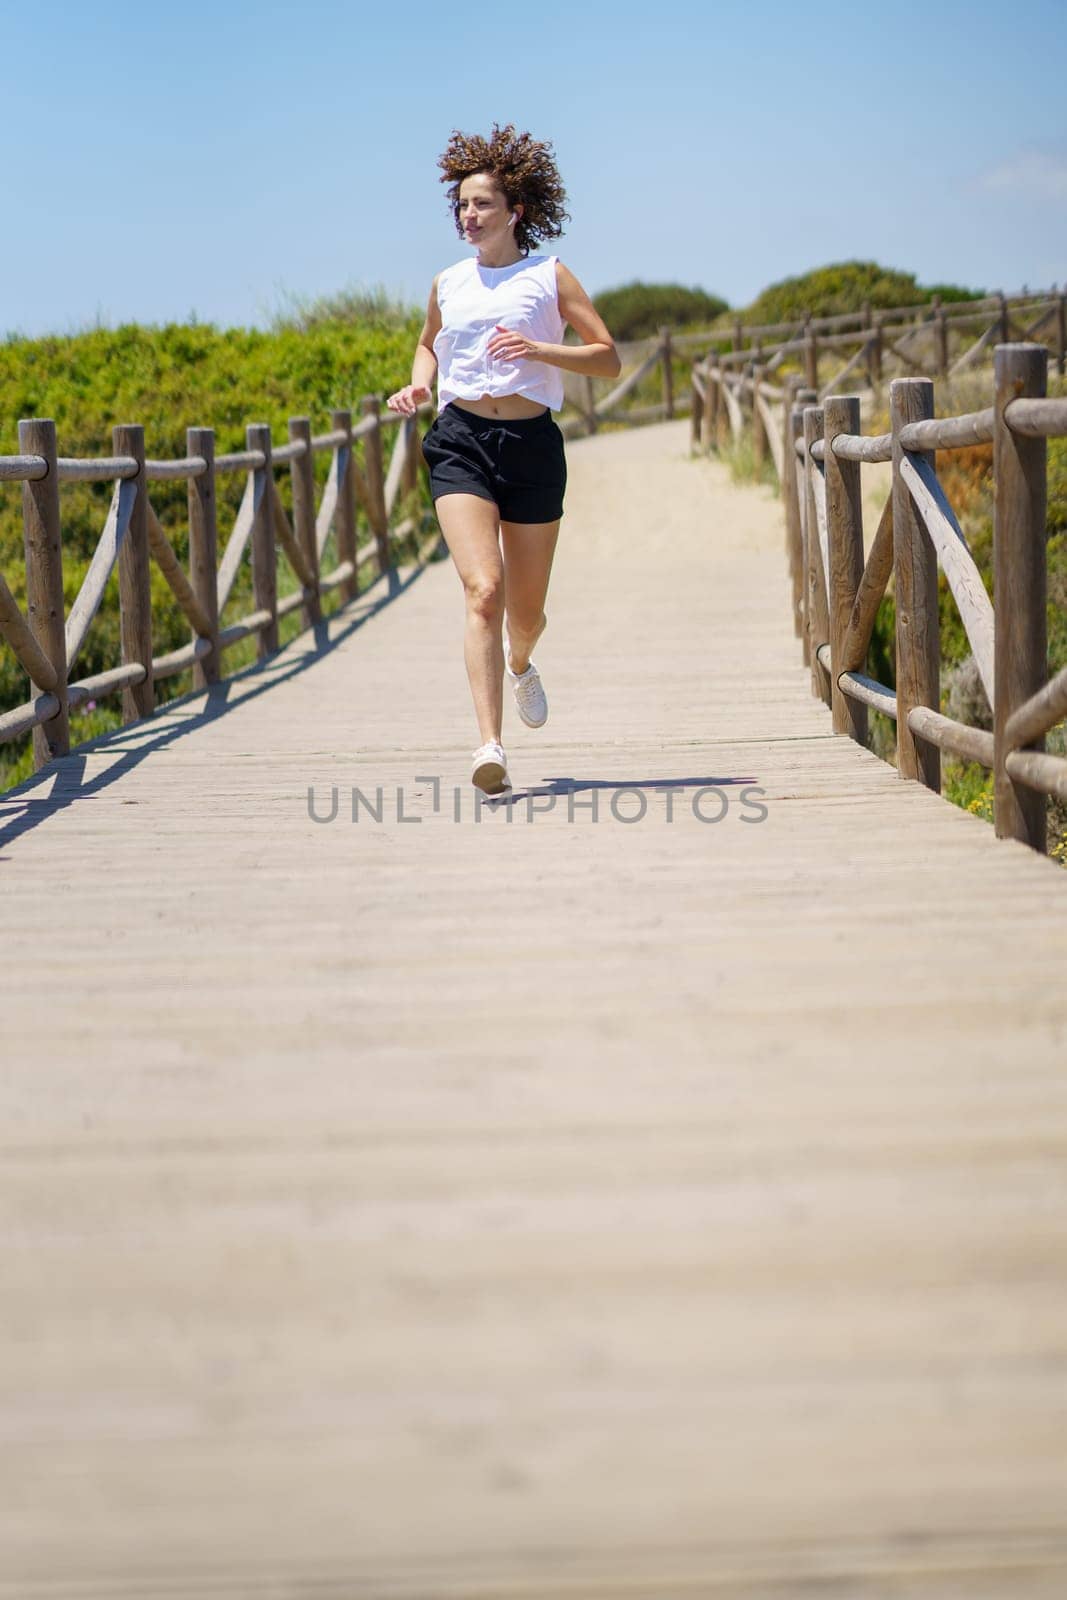 Full body of fit female athlete in sportswear running on wooden path and looking away during sunny summer day